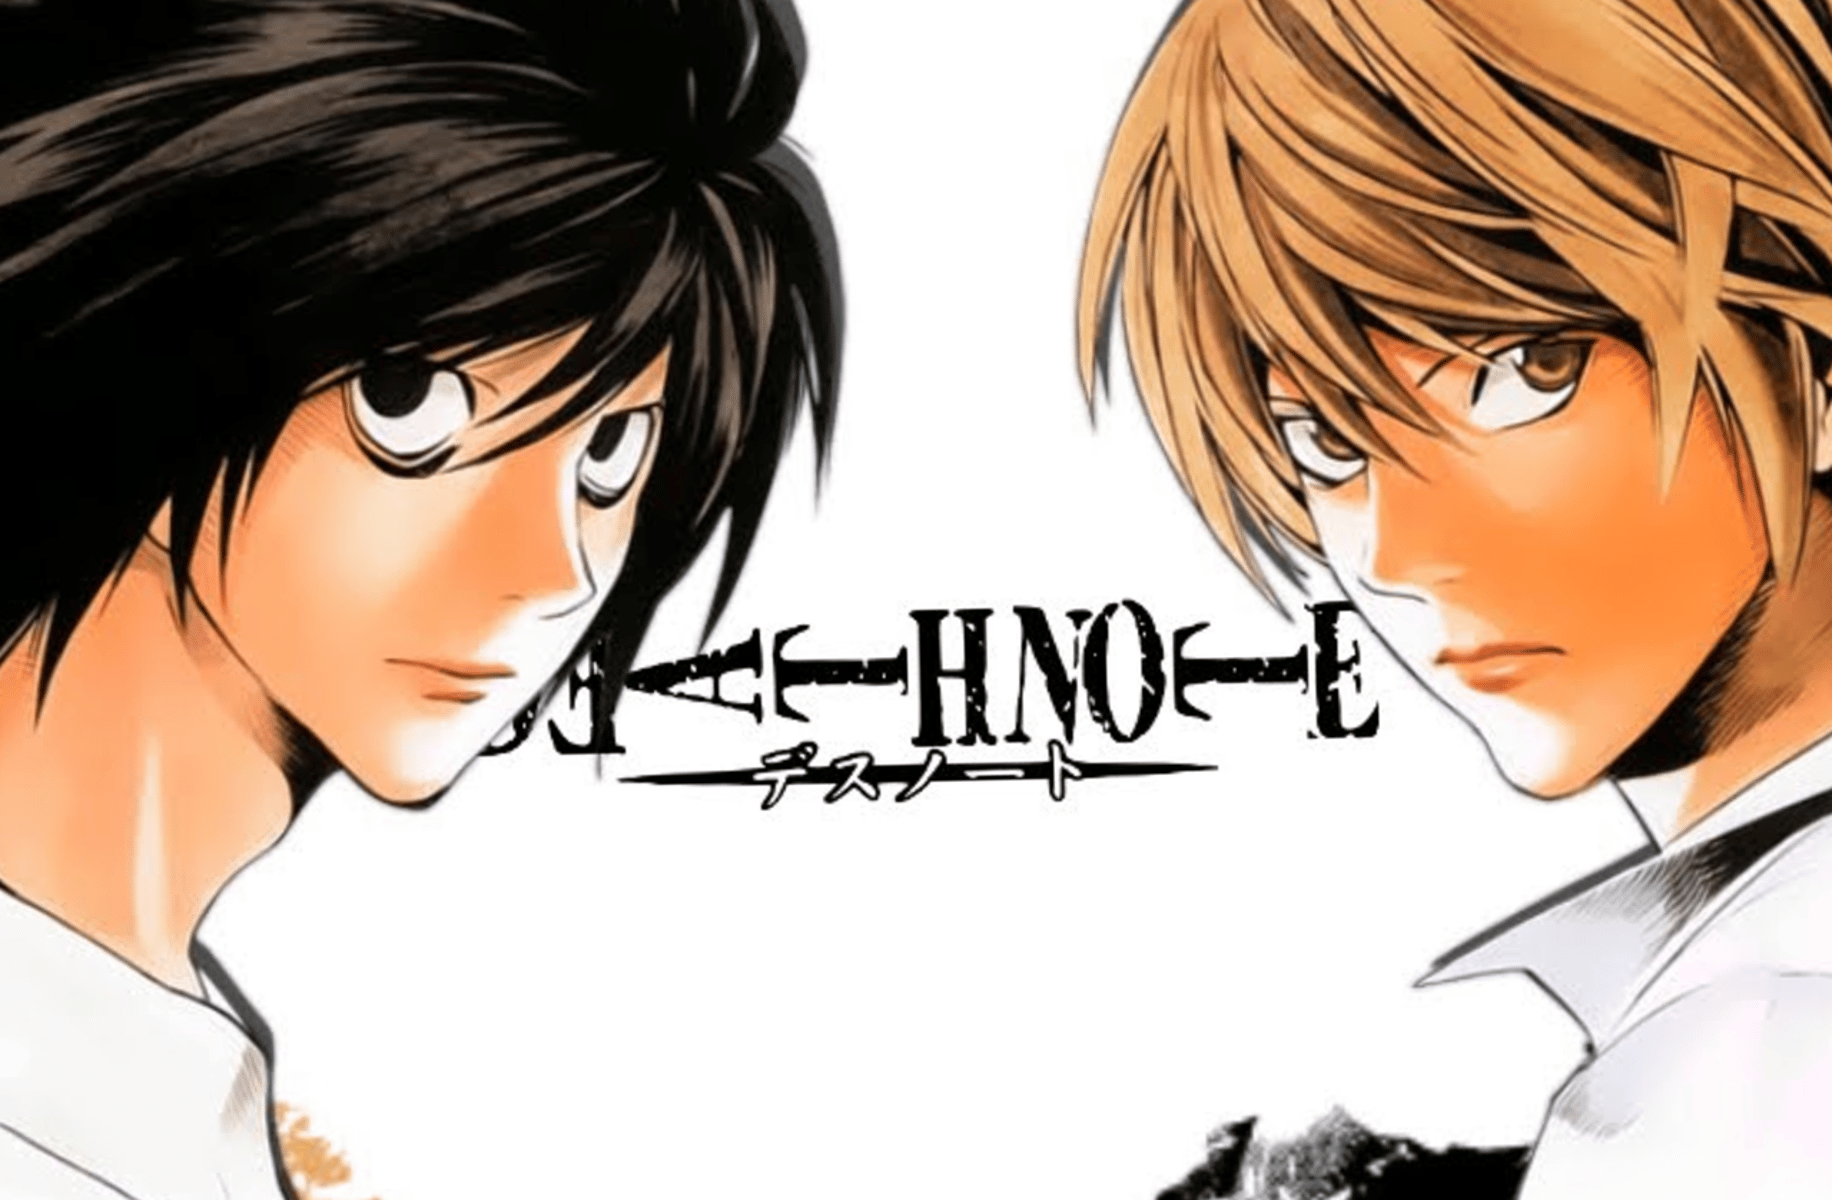 Death note rp